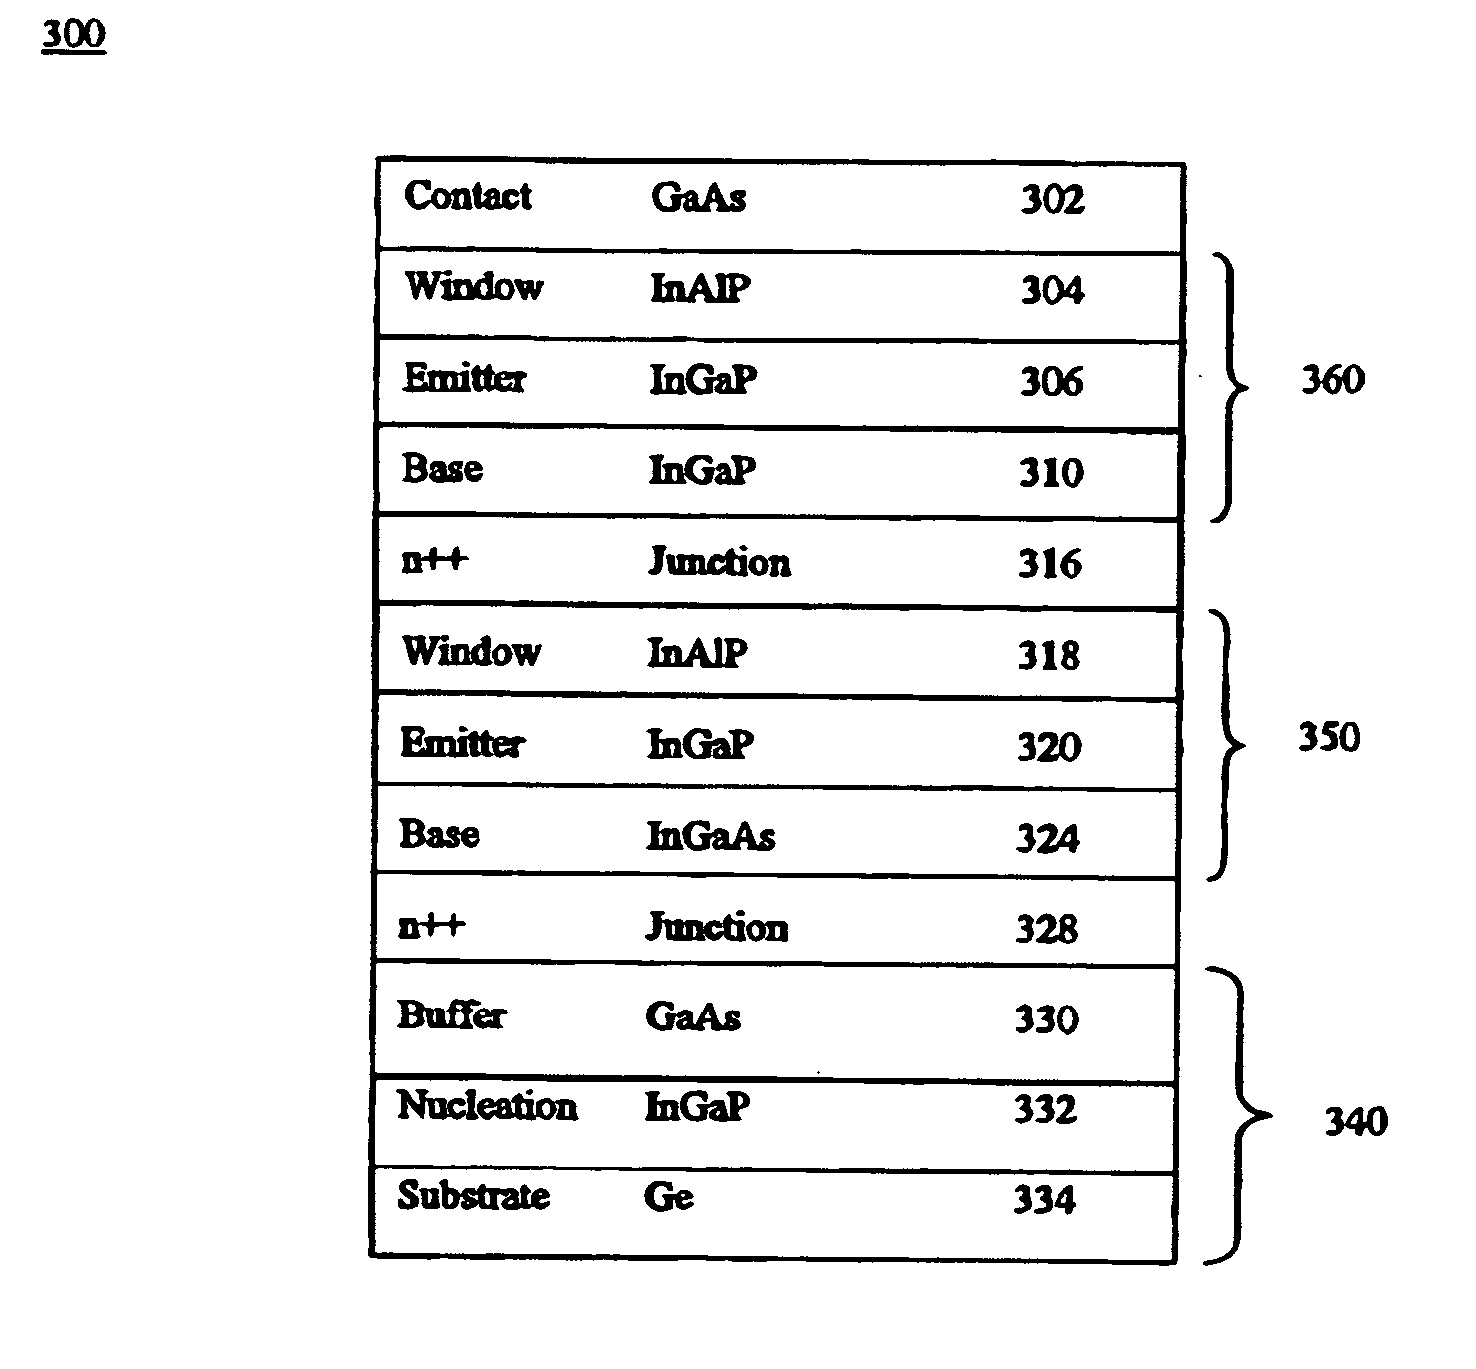 Method and apparatus of multiplejunction solar cell structure with high band gap heterojunction middle cell